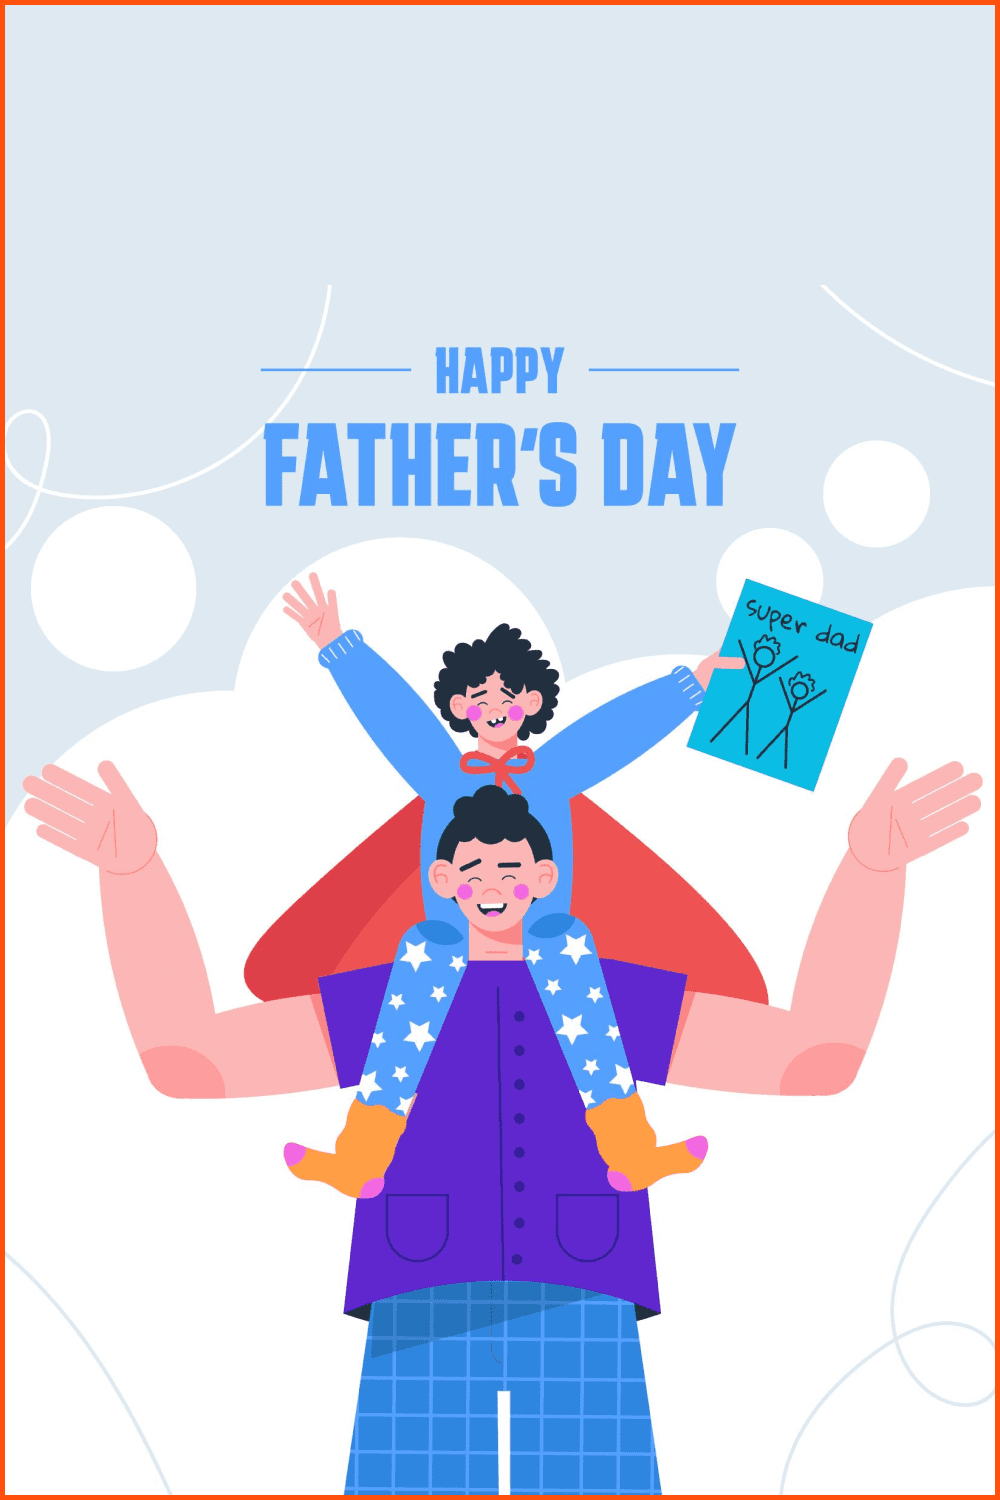 Organic Father's Day Illustration.